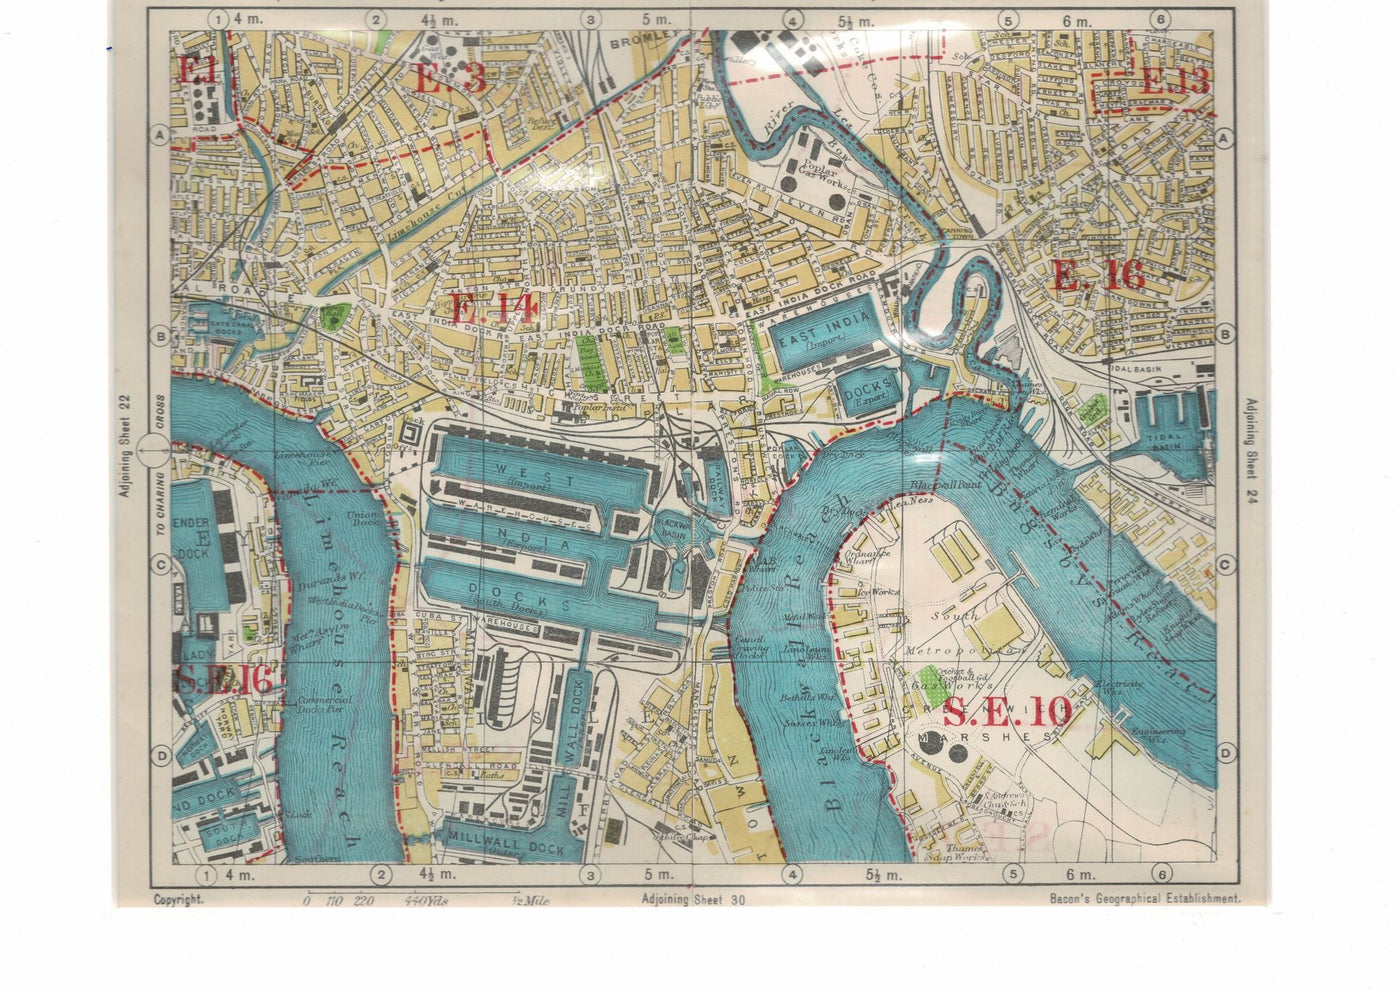 East and West India Docks, East London, 1938